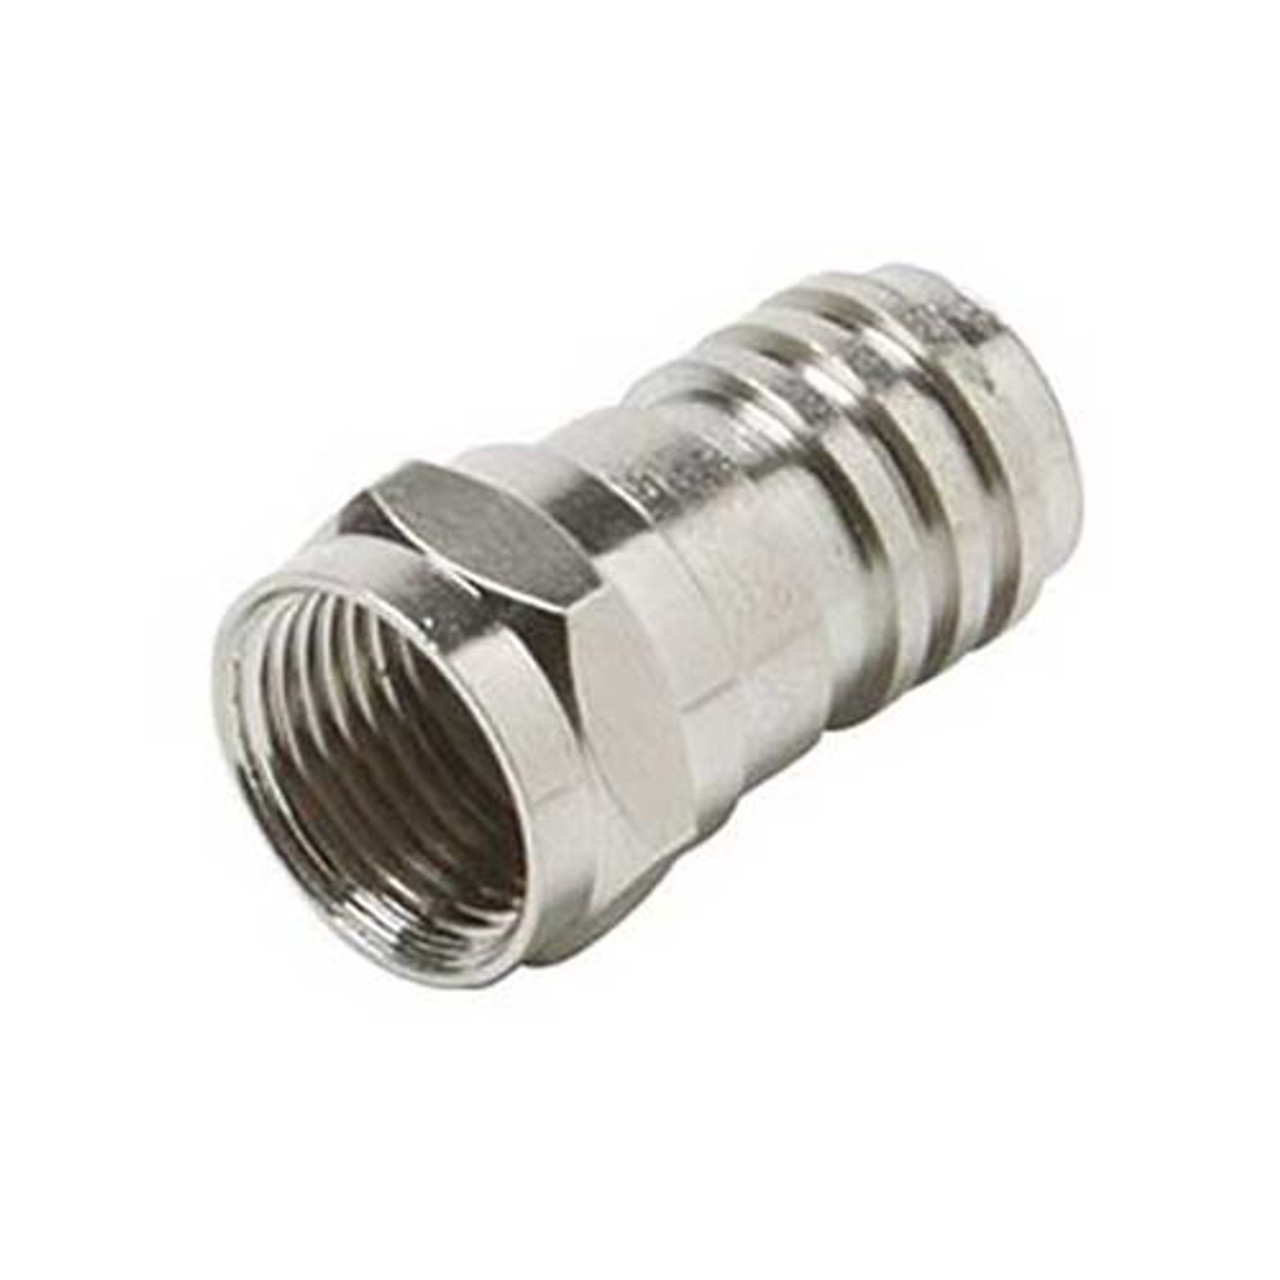 Steren 200-030-25 Crimp-On F Connector RG59 Nickel Plated Construction 25 Pack Single RG-59 Coaxial Cable F Connector Coax Cable Hex Crimp End Connector with Attached Crimp Ring, Part # 200030-25